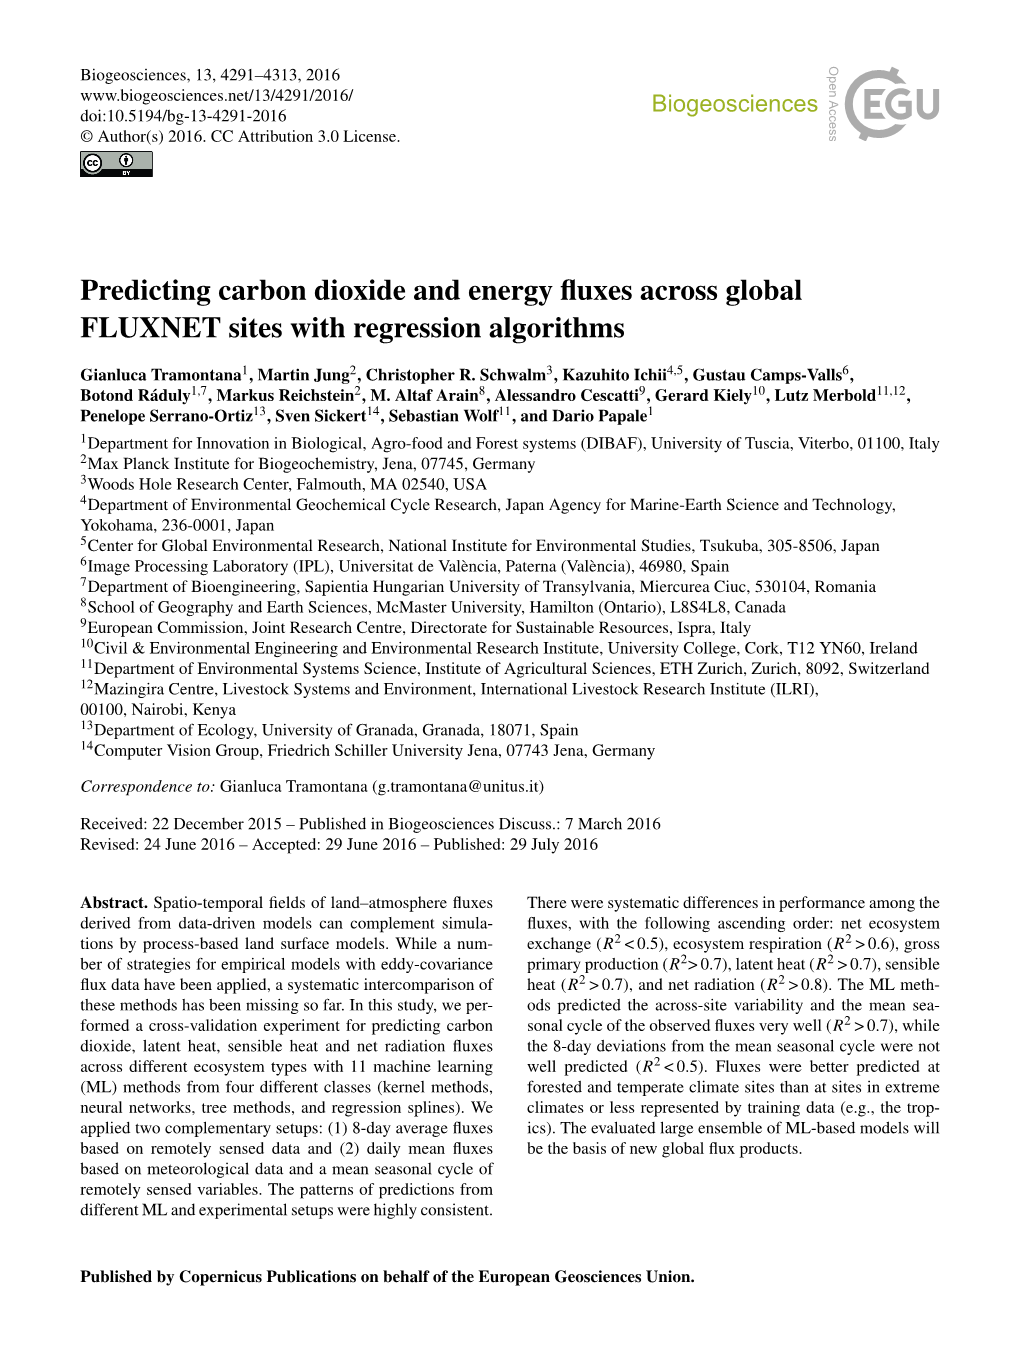 Predicting Carbon Dioxide and Energy Fluxes Across Global FLUXNET Sites